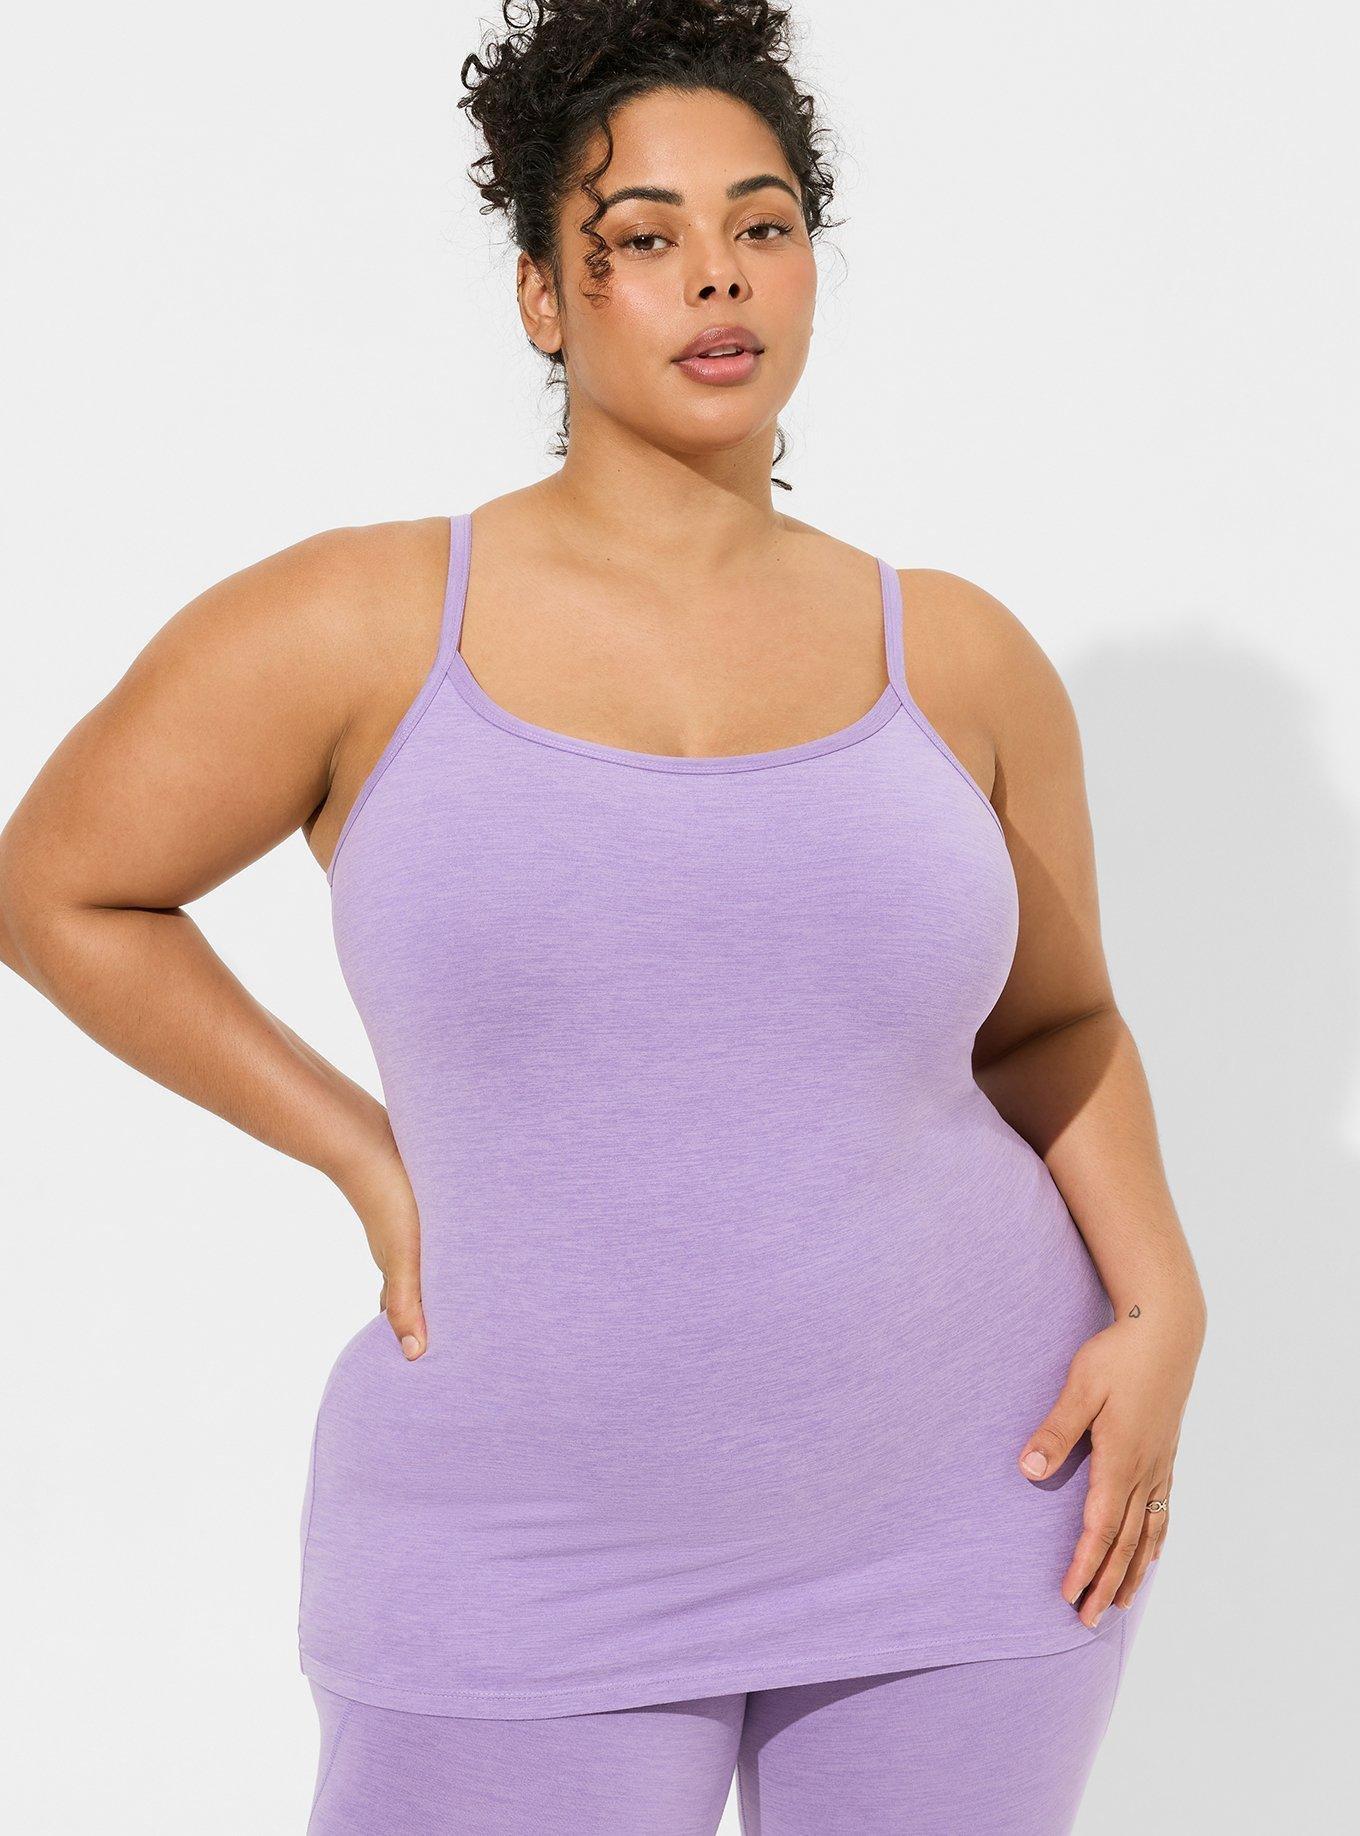 Shop Wear Ease Compression Camisole Online [Made in USA]